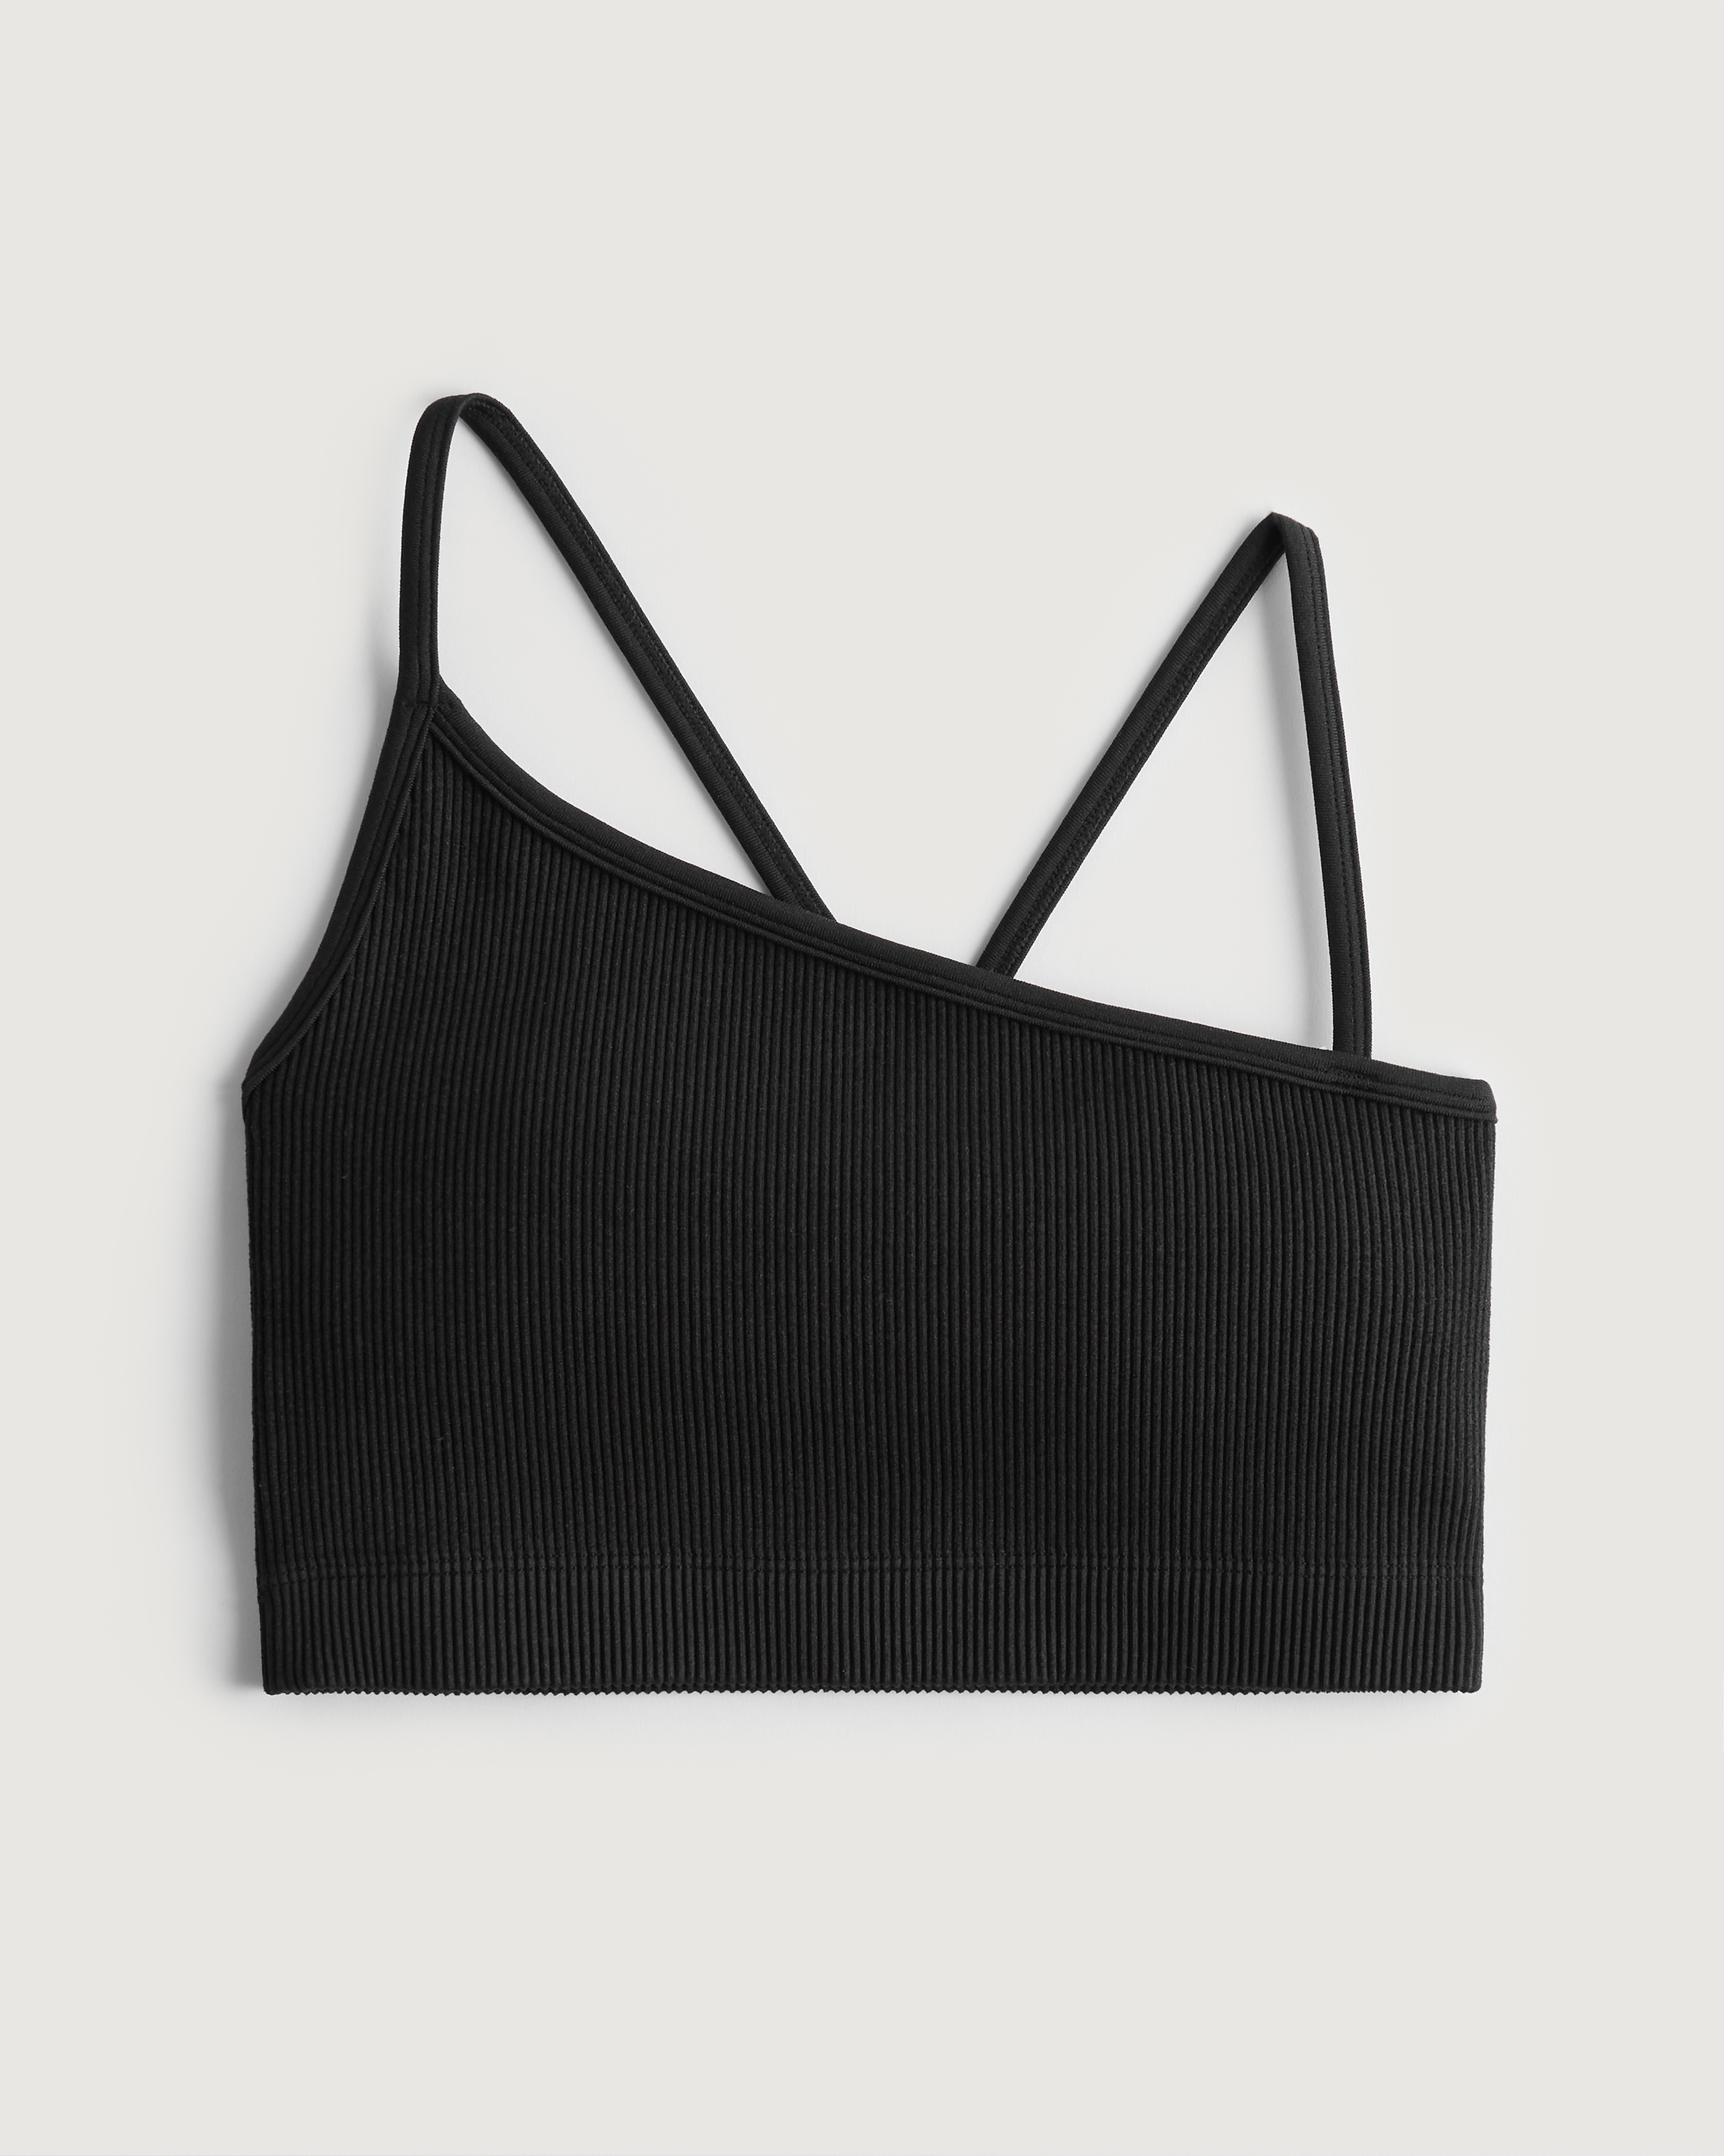 Hollister Gilly Hicks Active Seamless Square-Neck Sports Bra